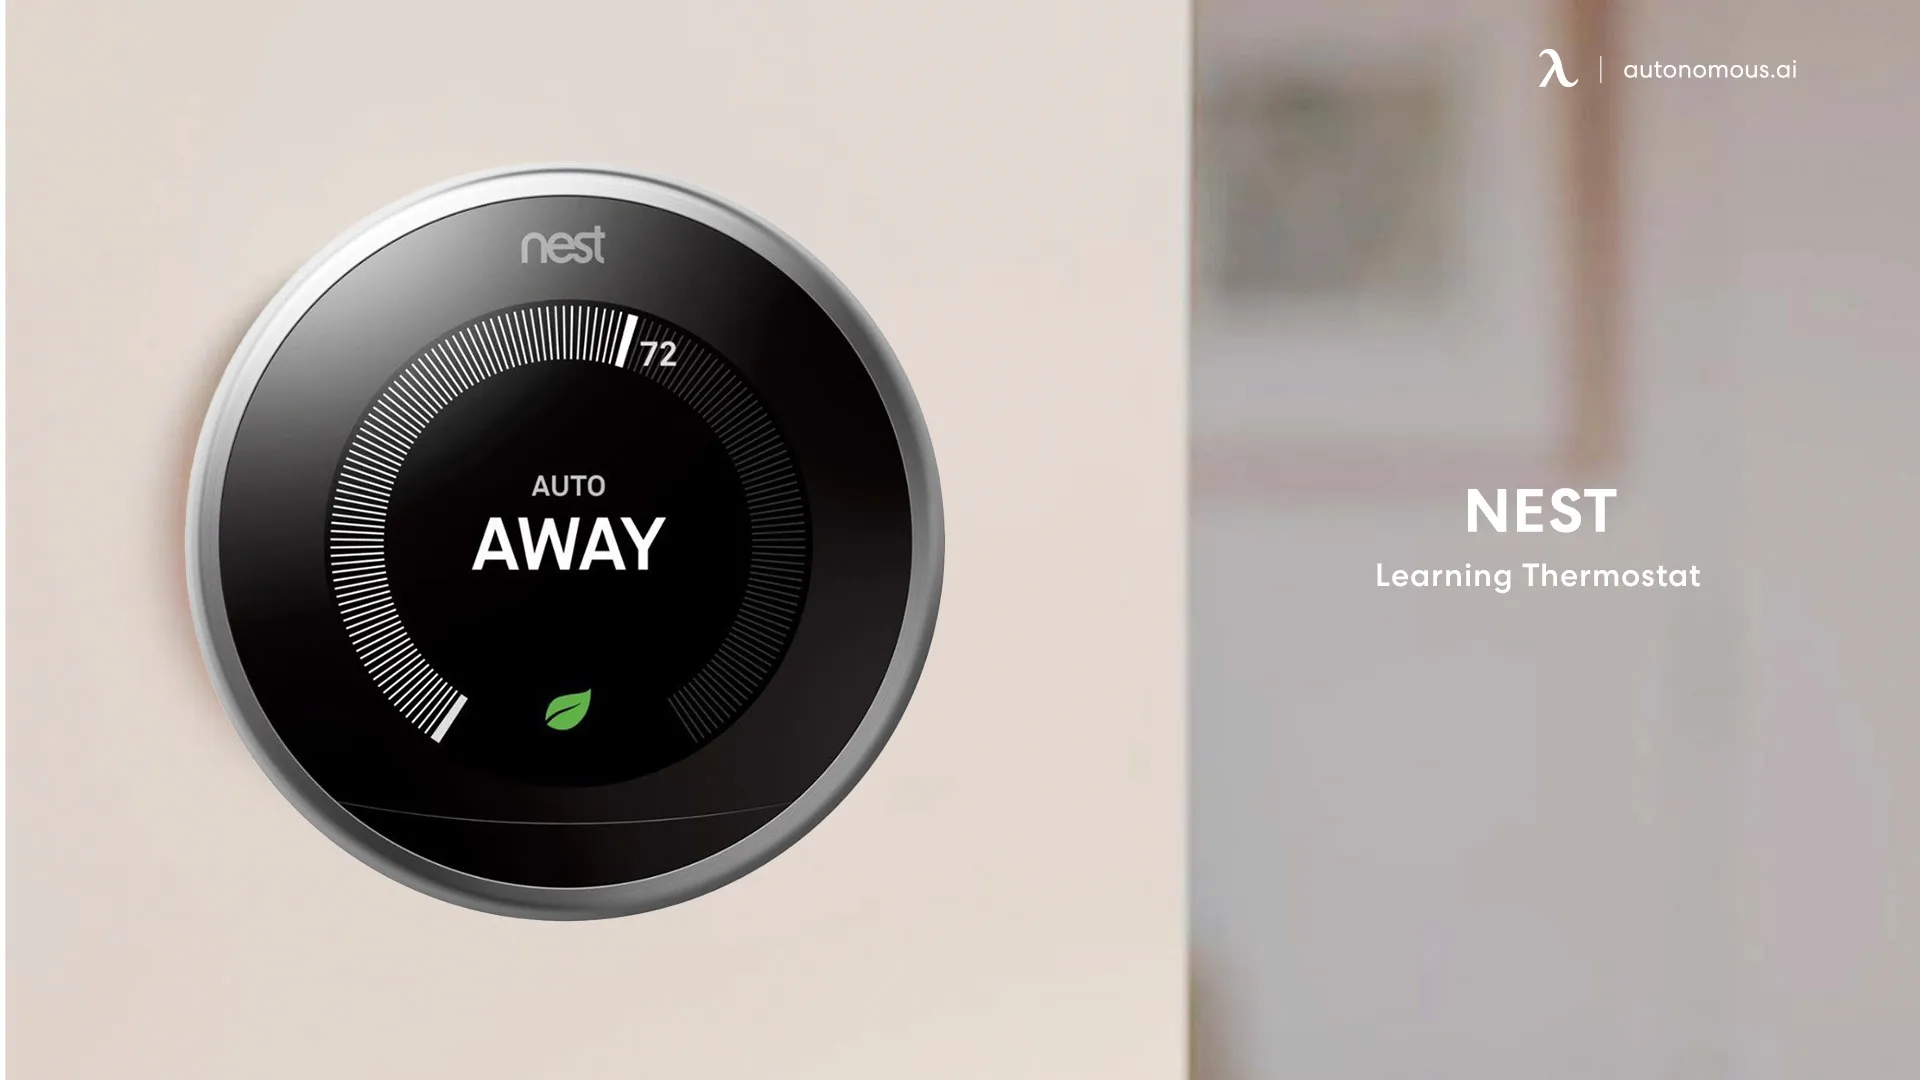 Nest Learning Thermostat - smart home appliance